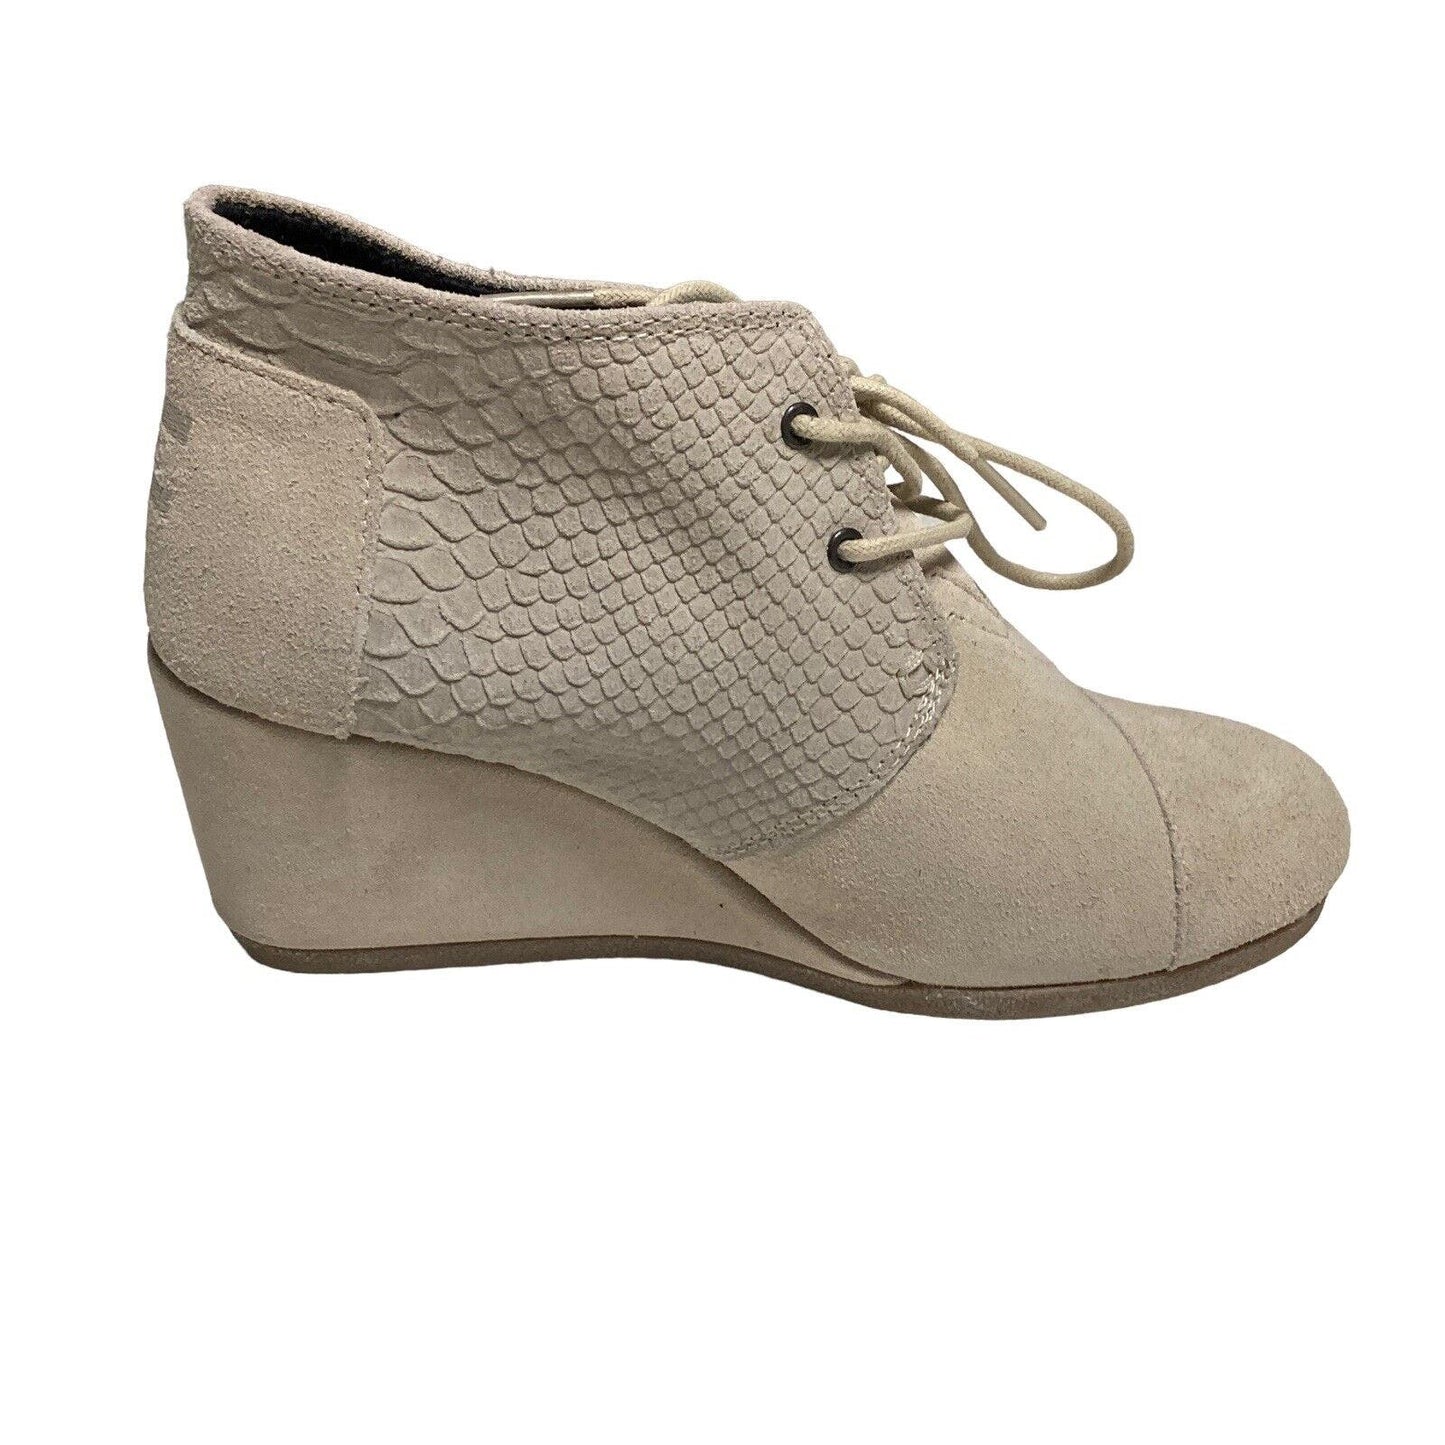 Toms Desert Wedge Cream Shoes Size 7 Women’s Lace Up Suede